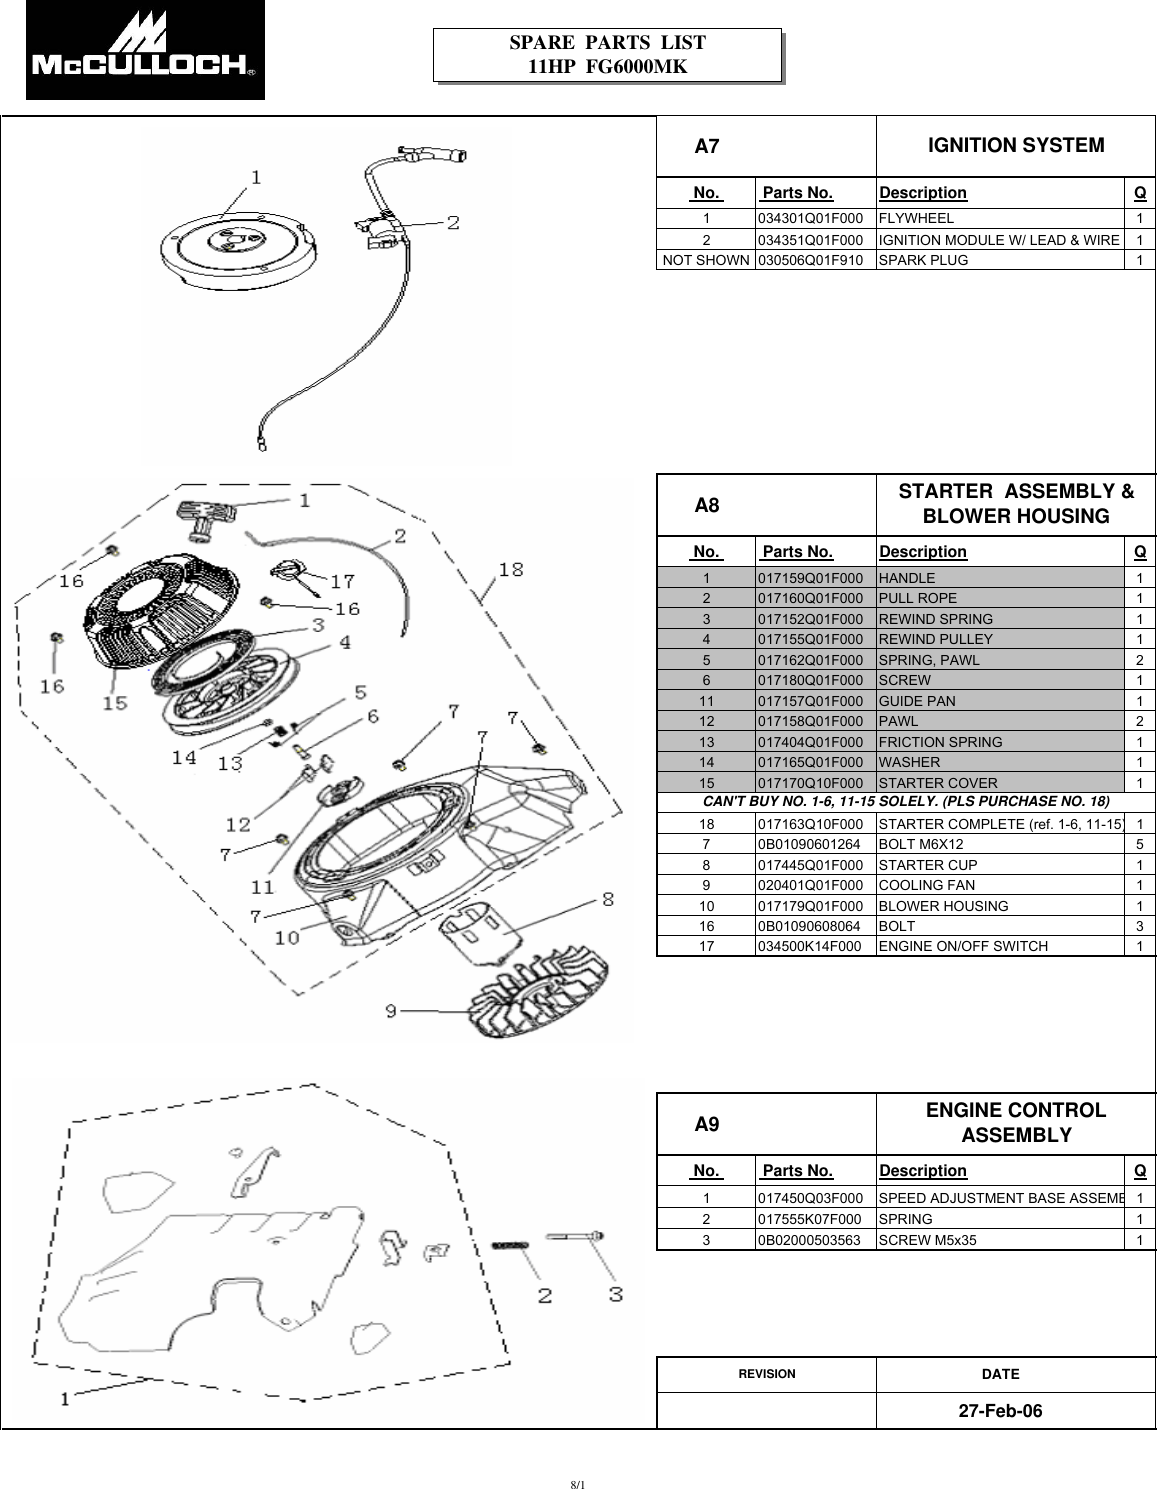 Page 8 of 12 - Mcculloch Mcculloch-Fg6000Mkud-C-Parts-List- IPL, McCulloch, FG6000MK, 2008-06, 7096FG6024, 966991401, US  Mcculloch-fg6000mkud-c-parts-list